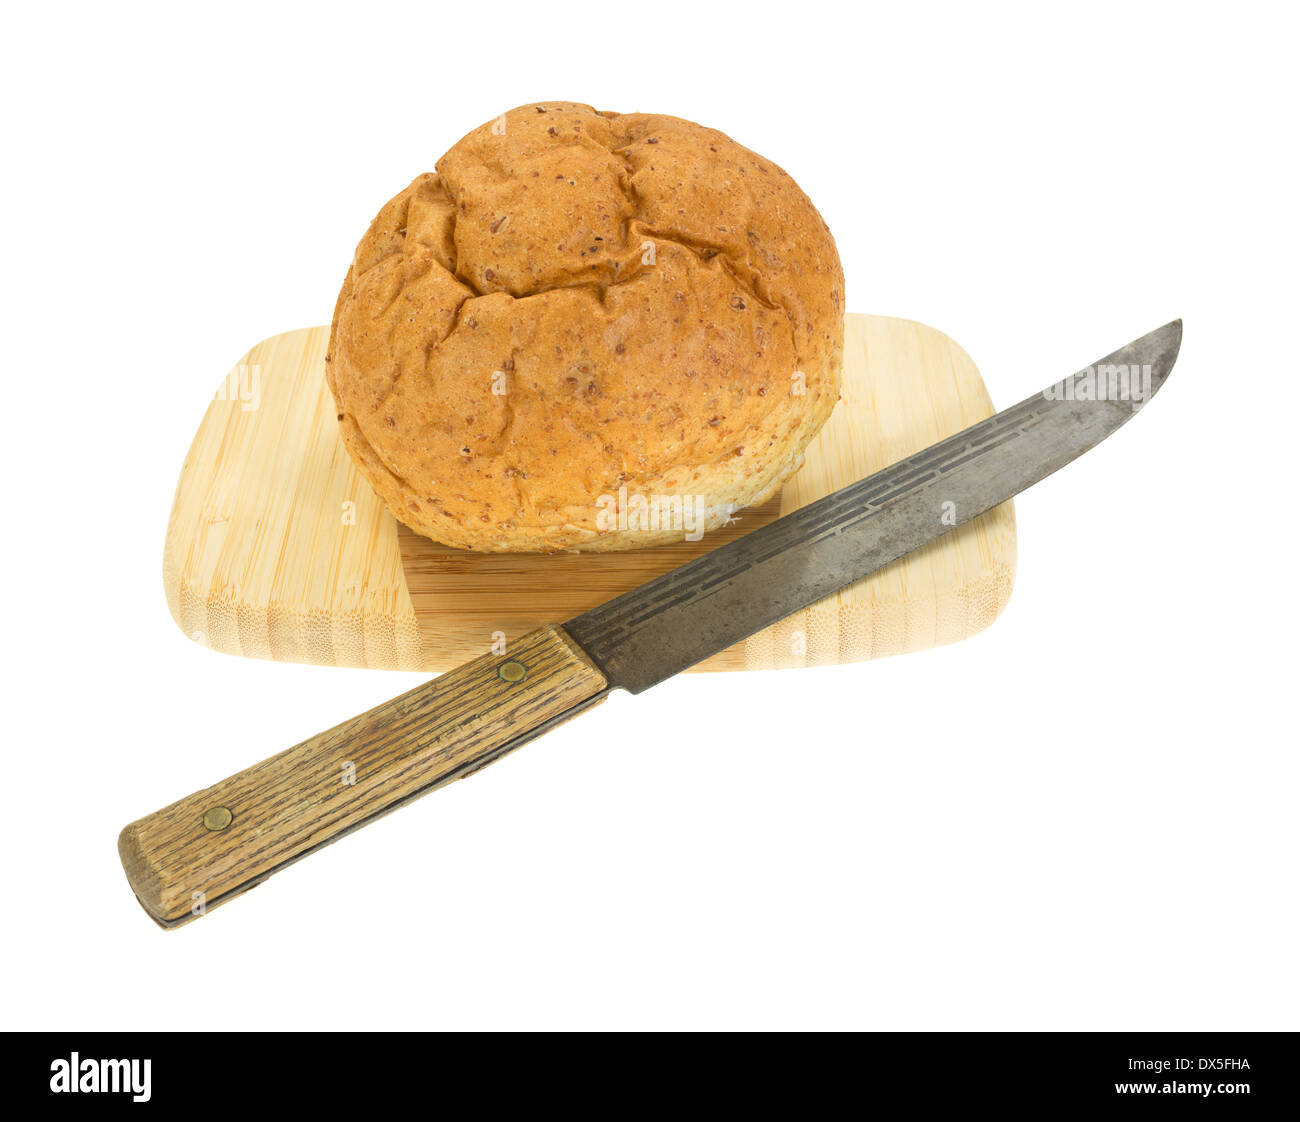 A small whole wheat boule bread on a wood cutting board with old kitchen knife. Stock Photo